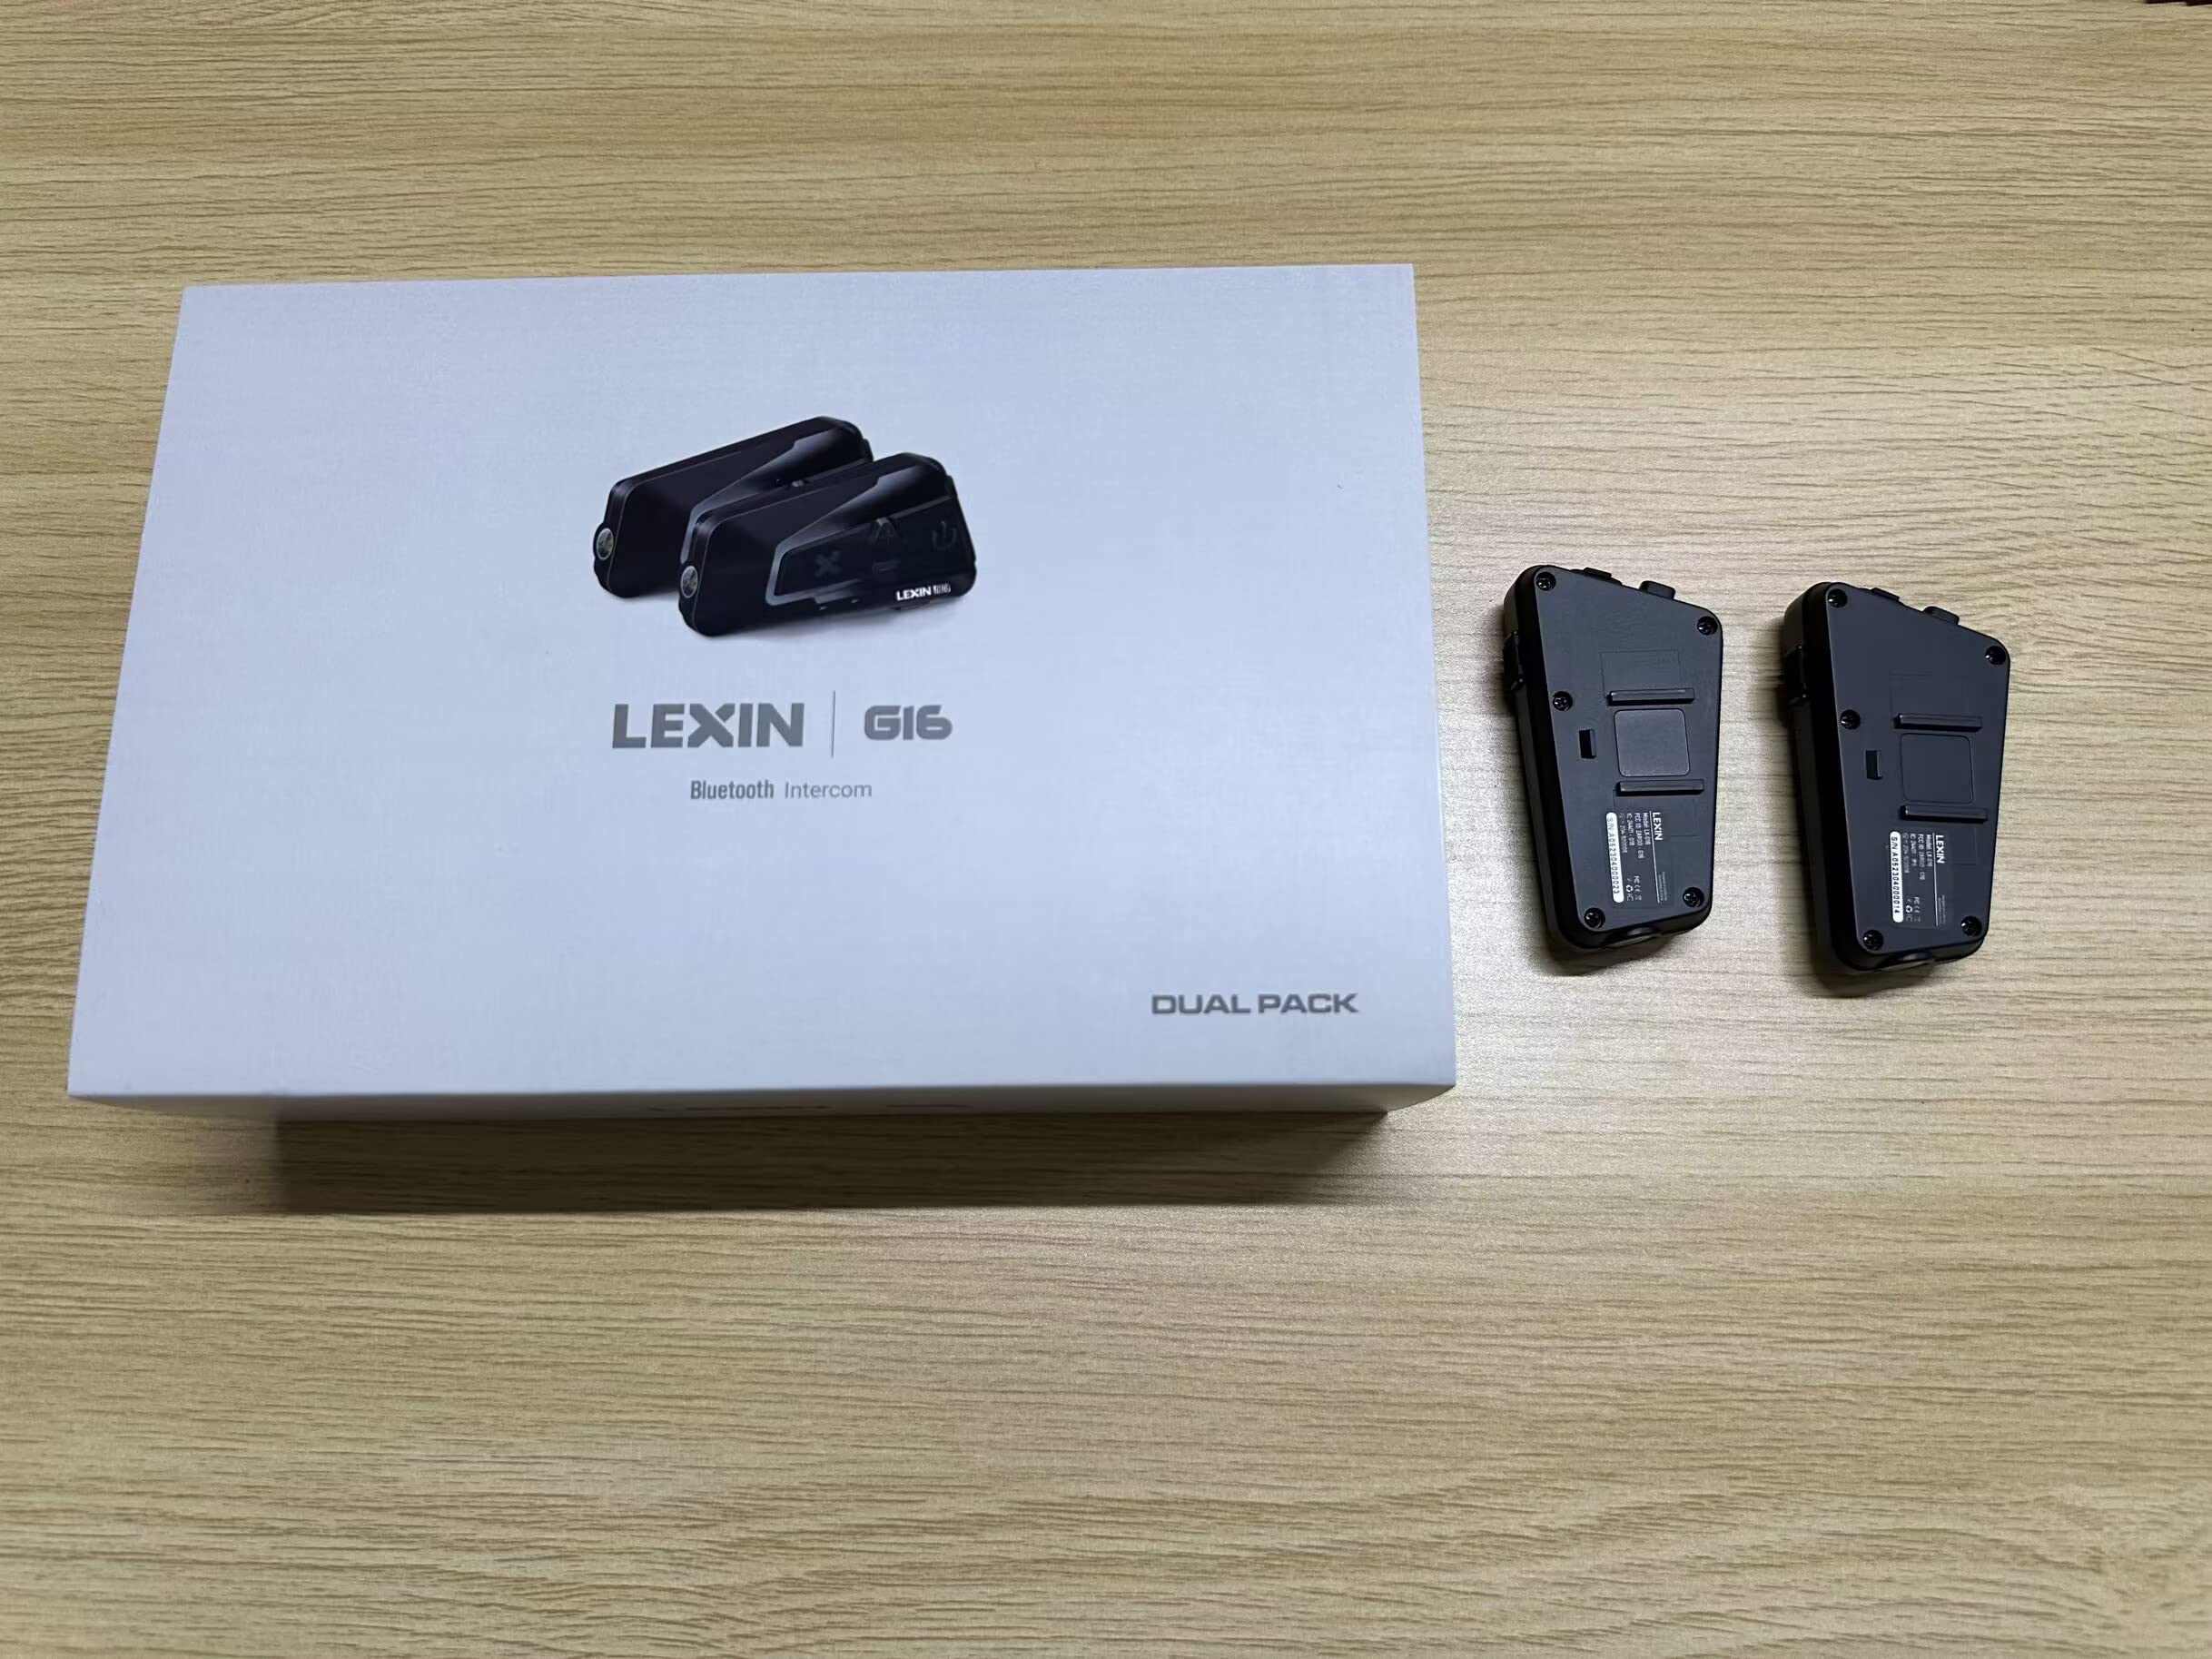 LEXIN 2pcs G16 Motorcycle Bluetooth Headset with Headlamp/SOS Mode, Up to 16 Riders 2000m Helmet Commnunication System, Motorcycle Intercom with Music Sharing/Universal Pairing for Snowmobile/ATV